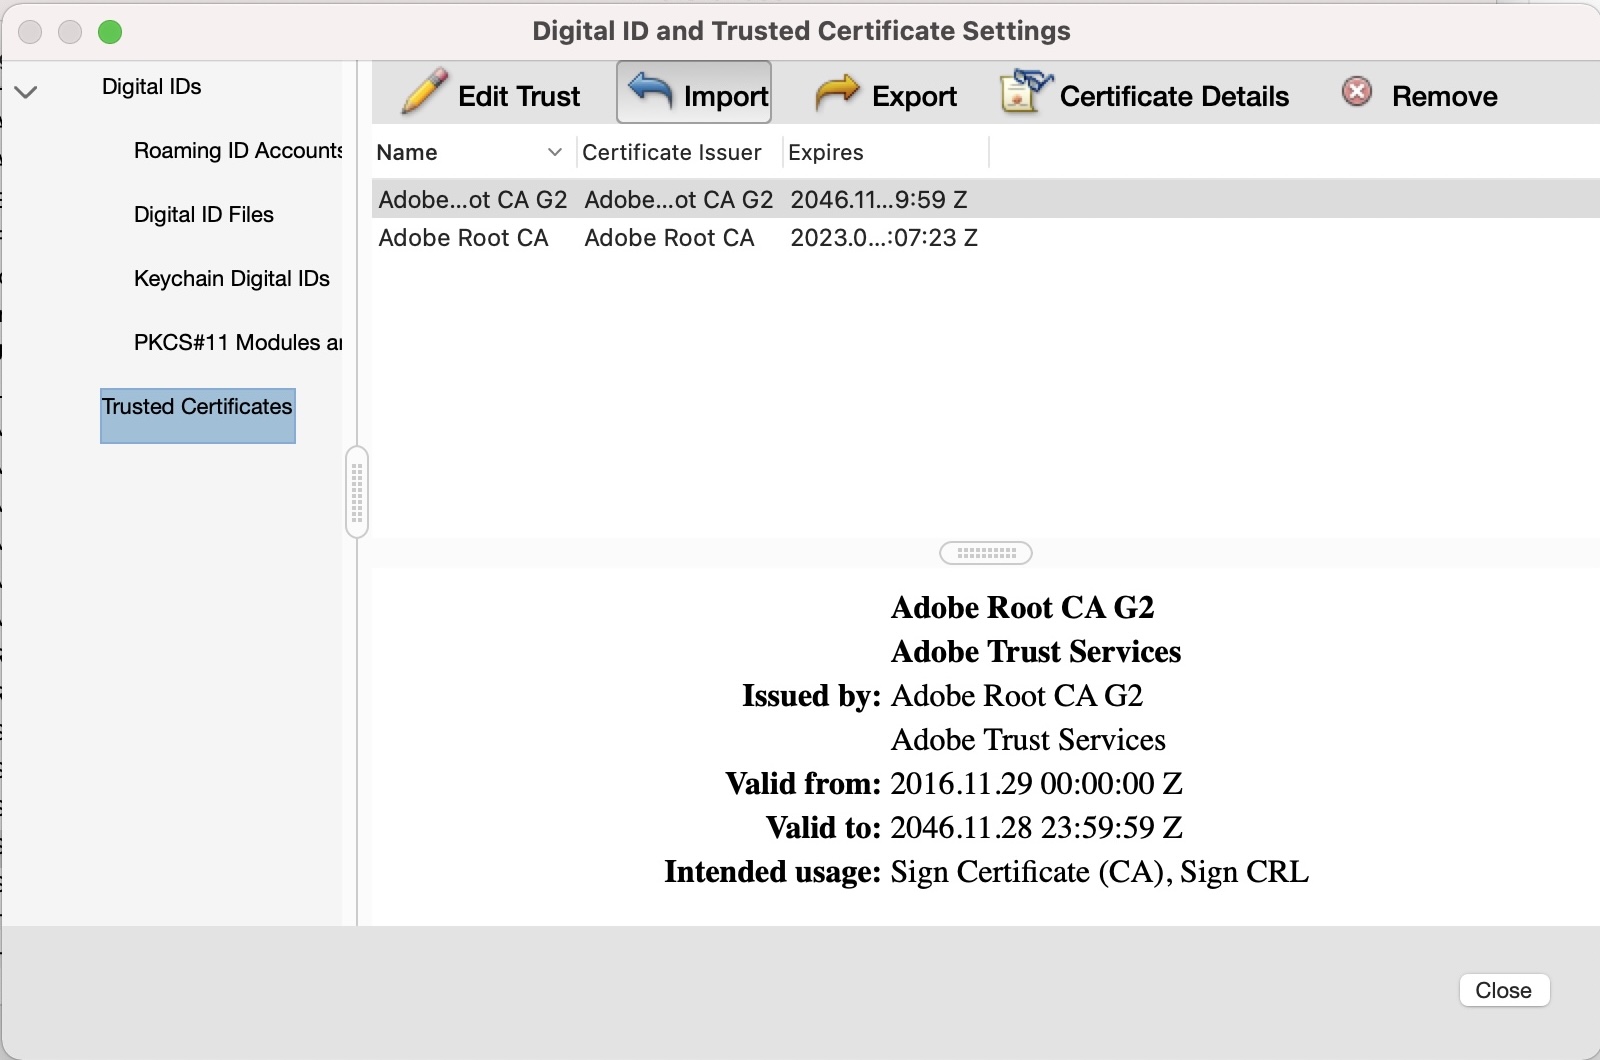 Importing new trusted certificates